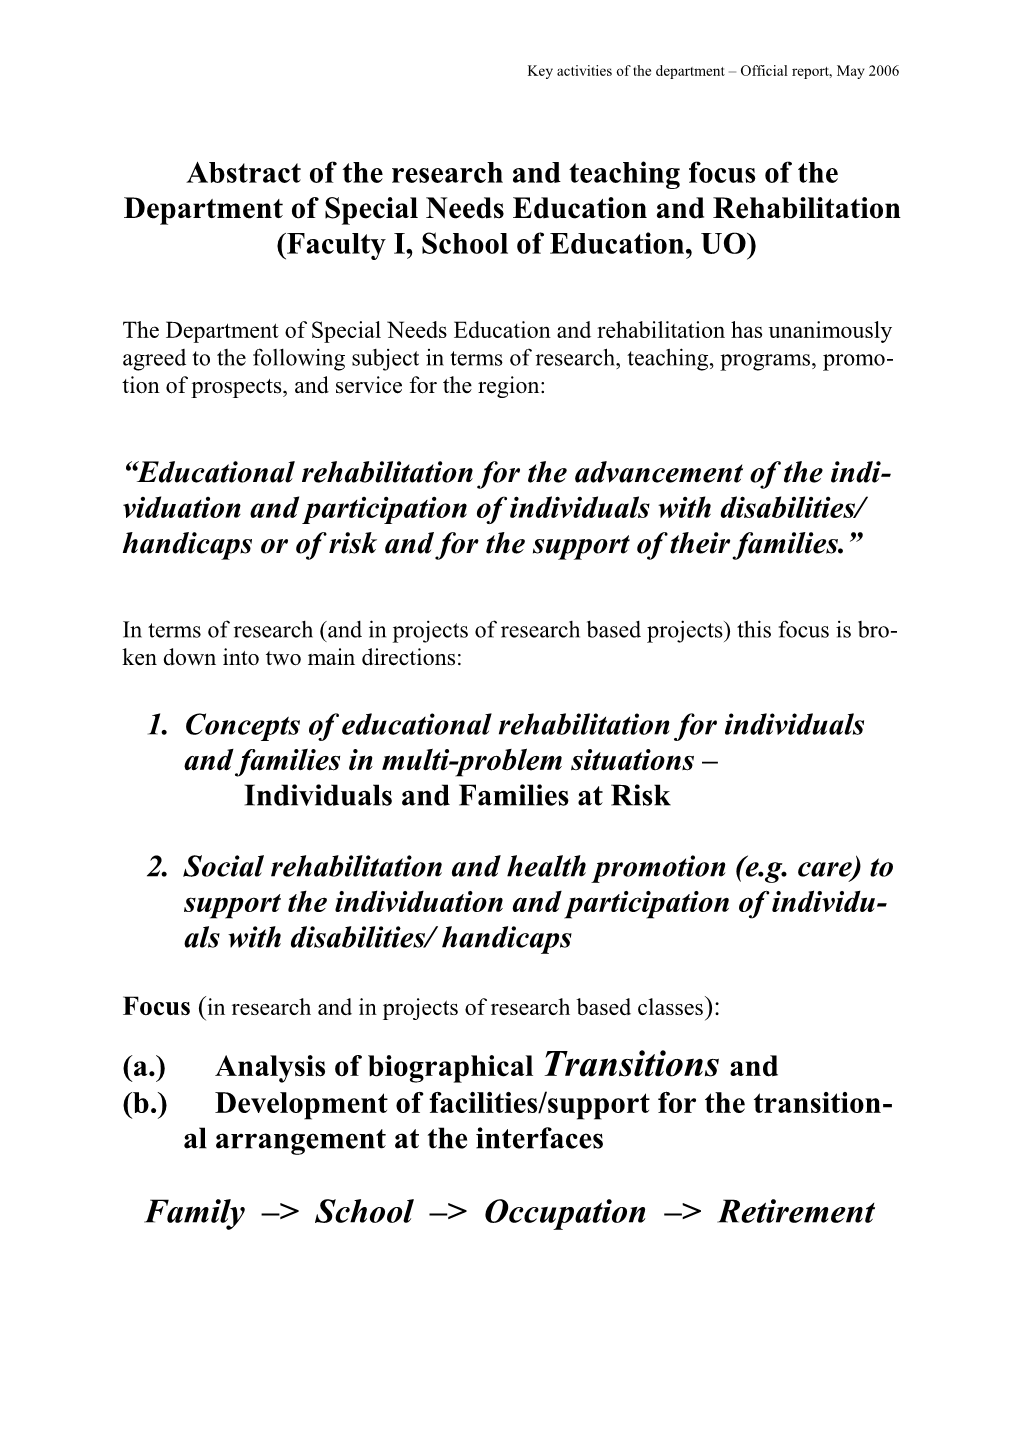 Abstract of the Research and Schooling Focus of the Department of Special Needs Education